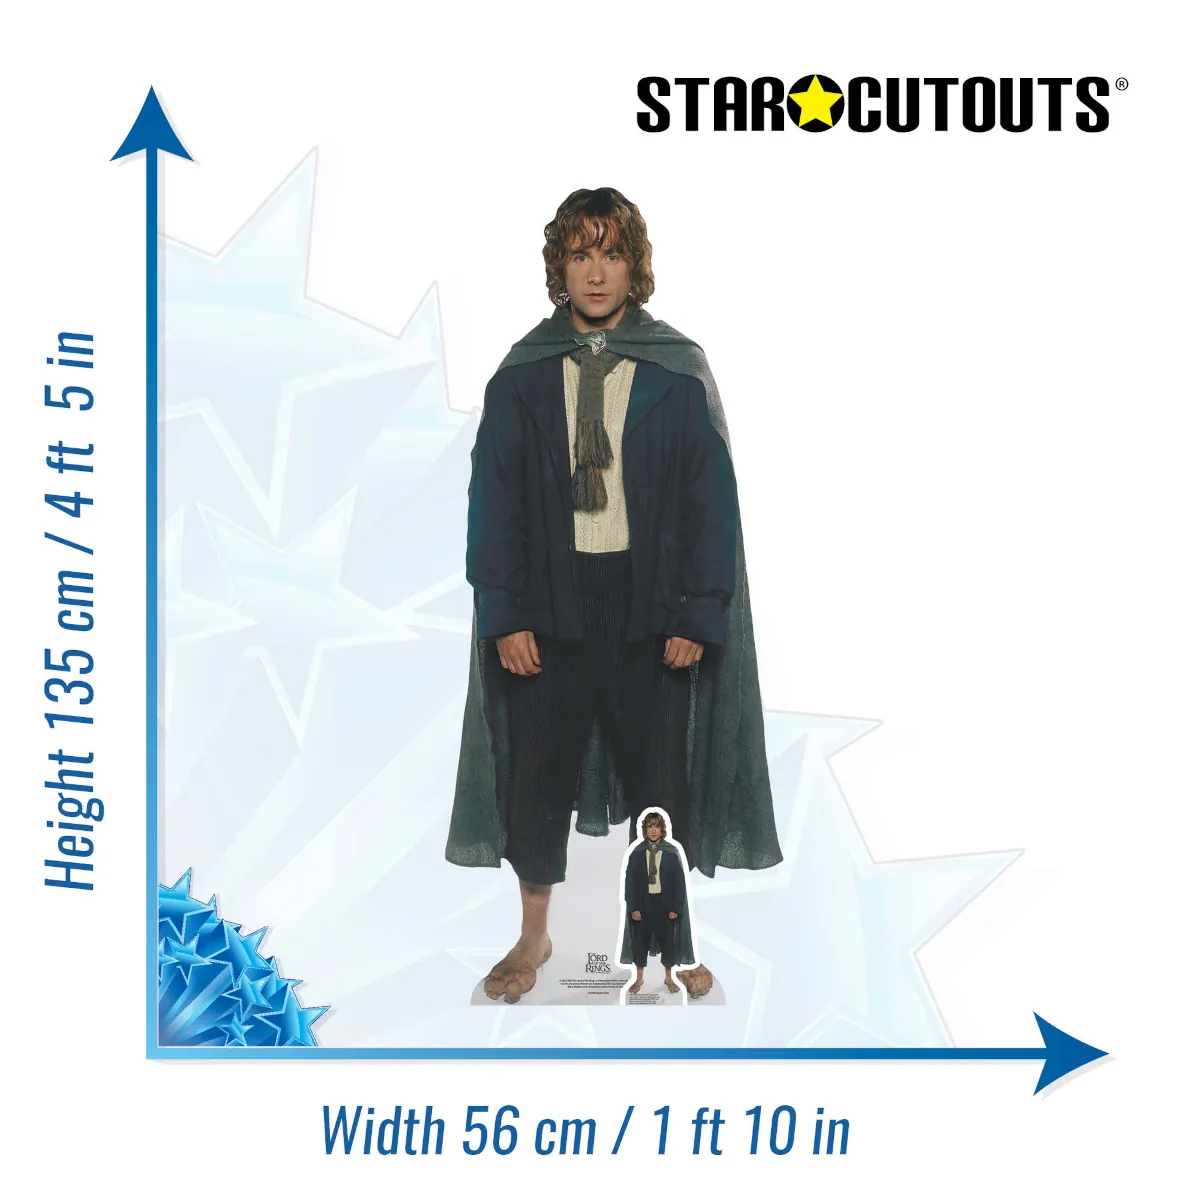 SC4200 Peregrin Took 'Pippin' (The Lord of the Rings) Lifesize + Mini Cardboard Cutout Standee Size